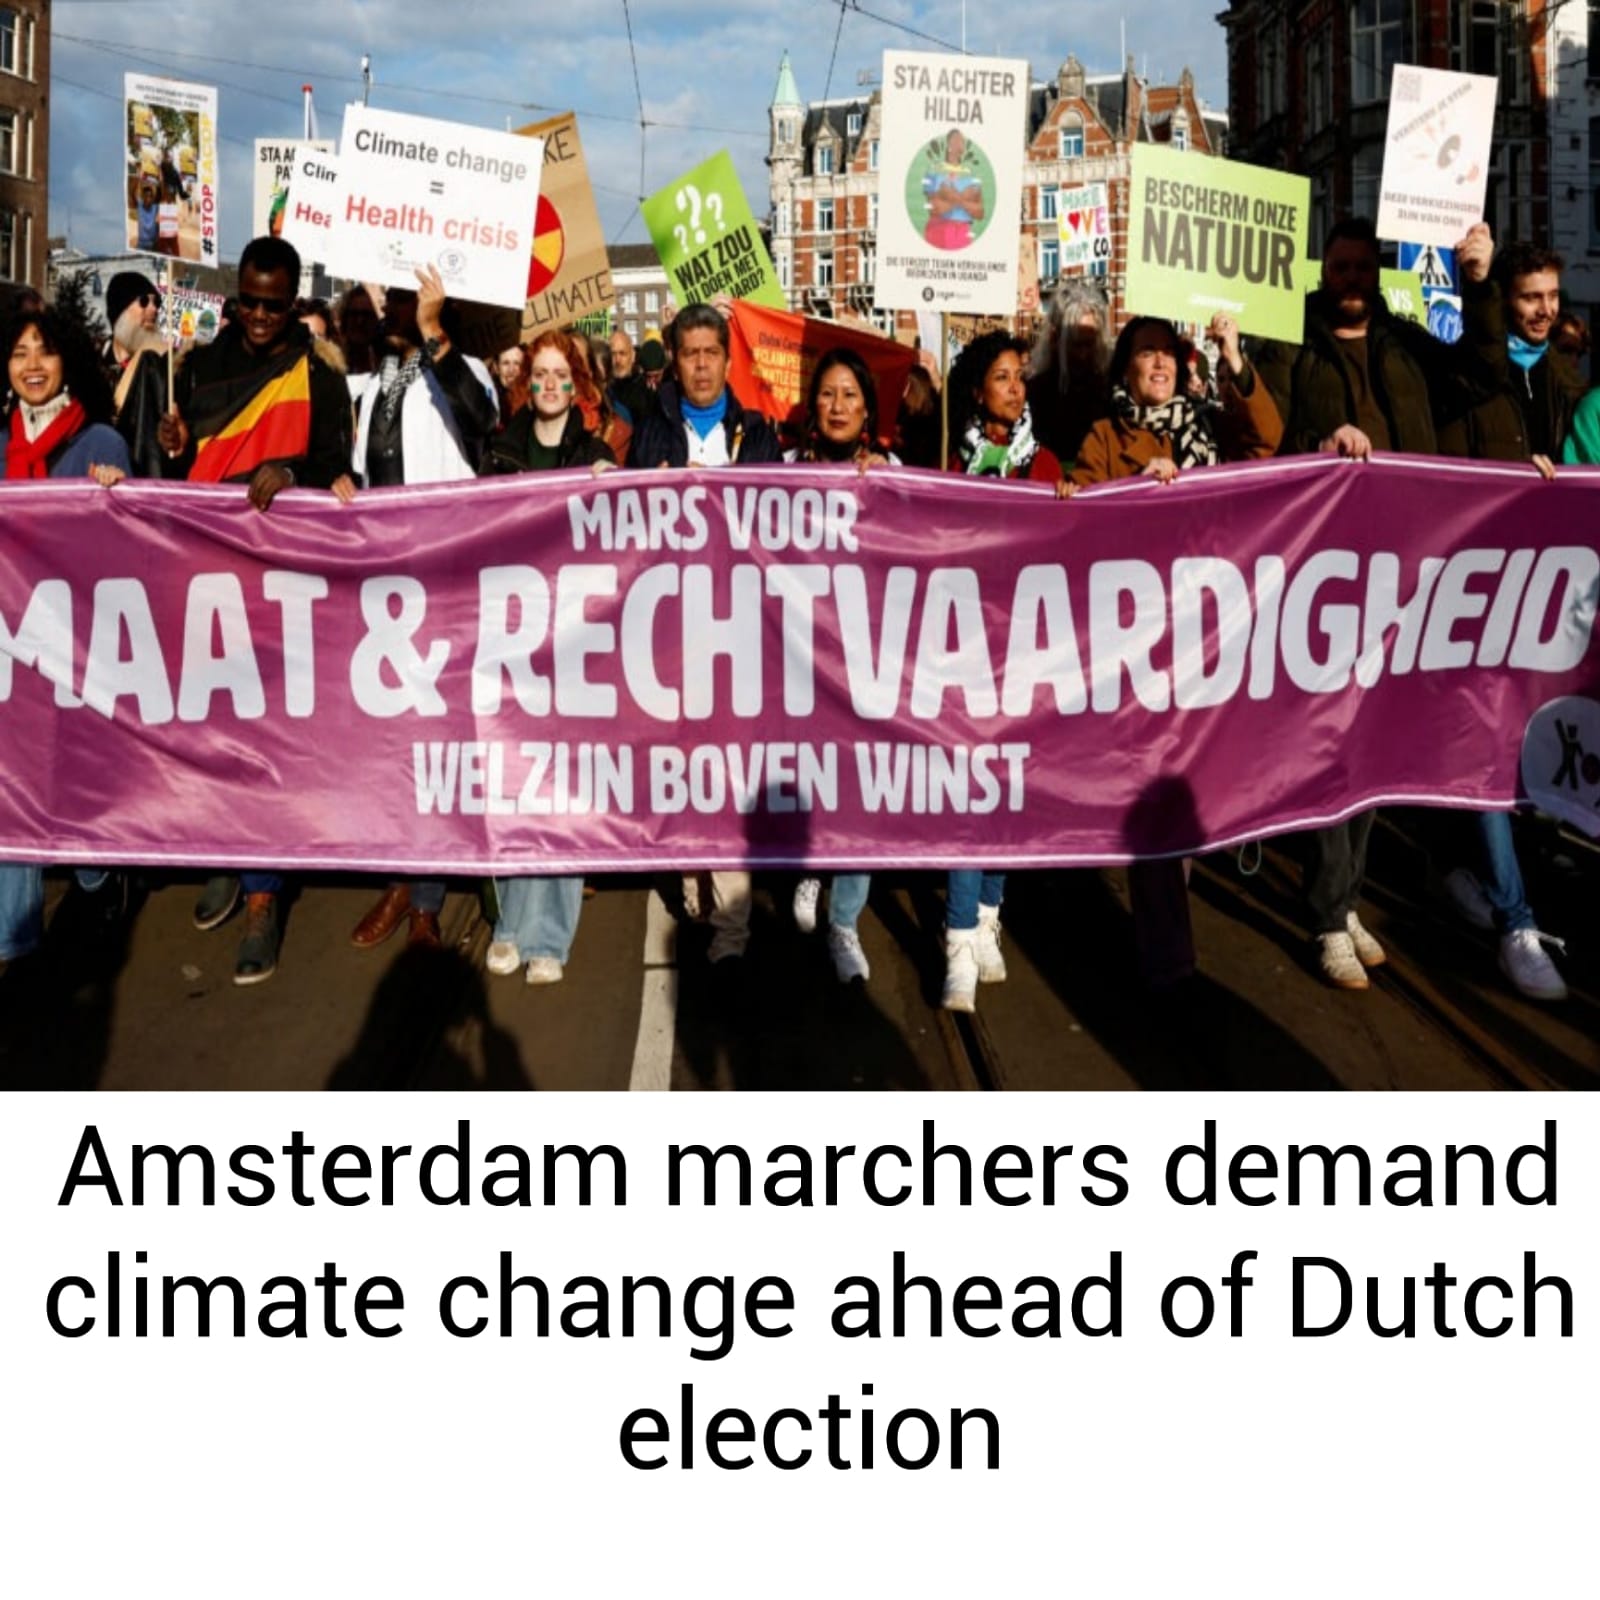 Amsterdam marchers demand climate change ahead of Dutch election